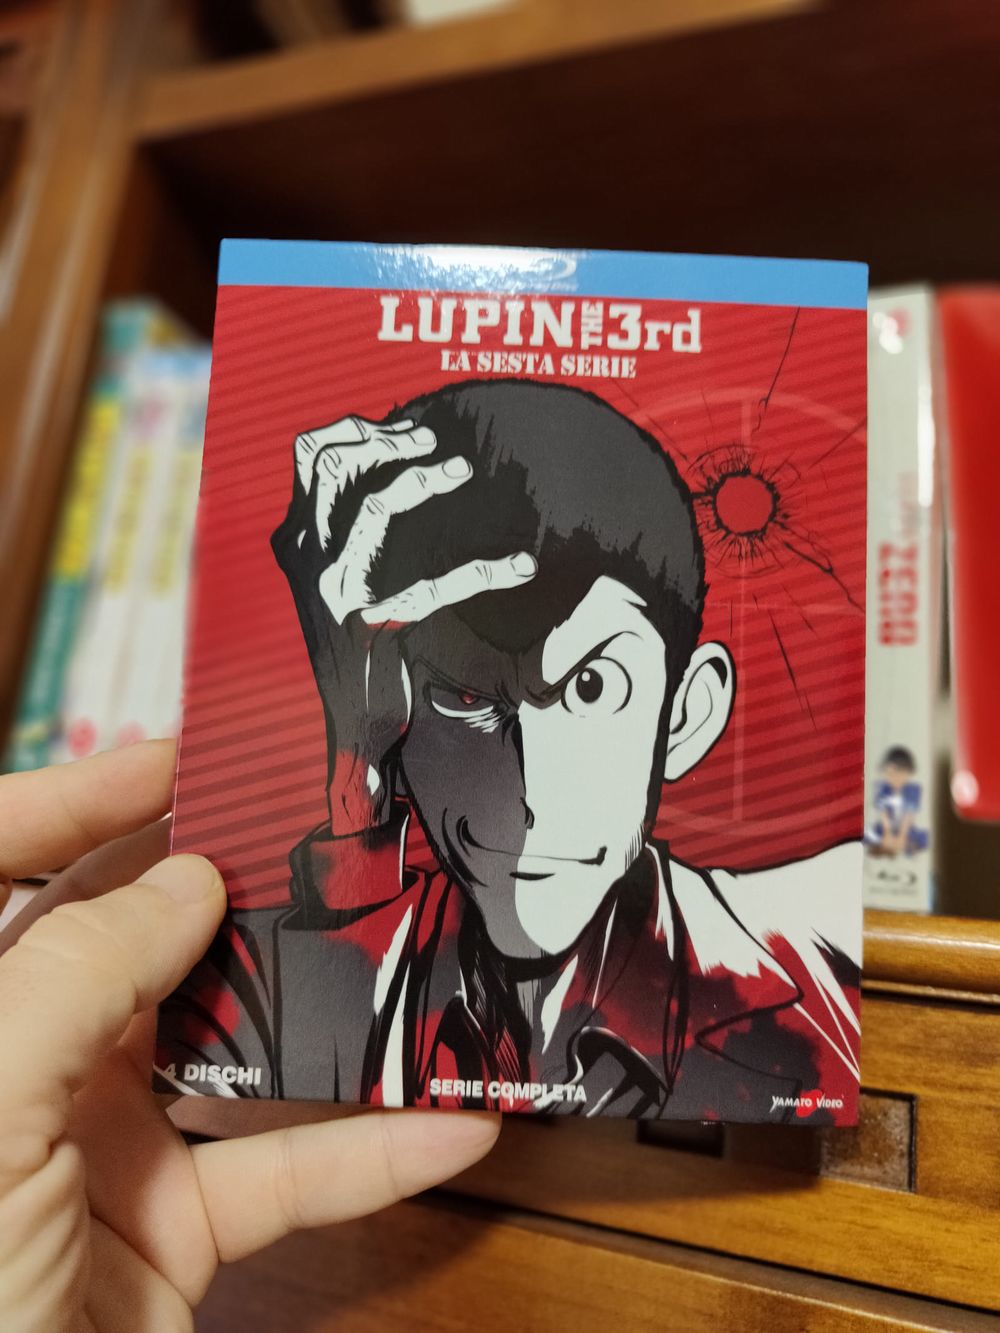 Lupin_III_-_6_serie_unboxing-64fdf63e6bc36.jpg